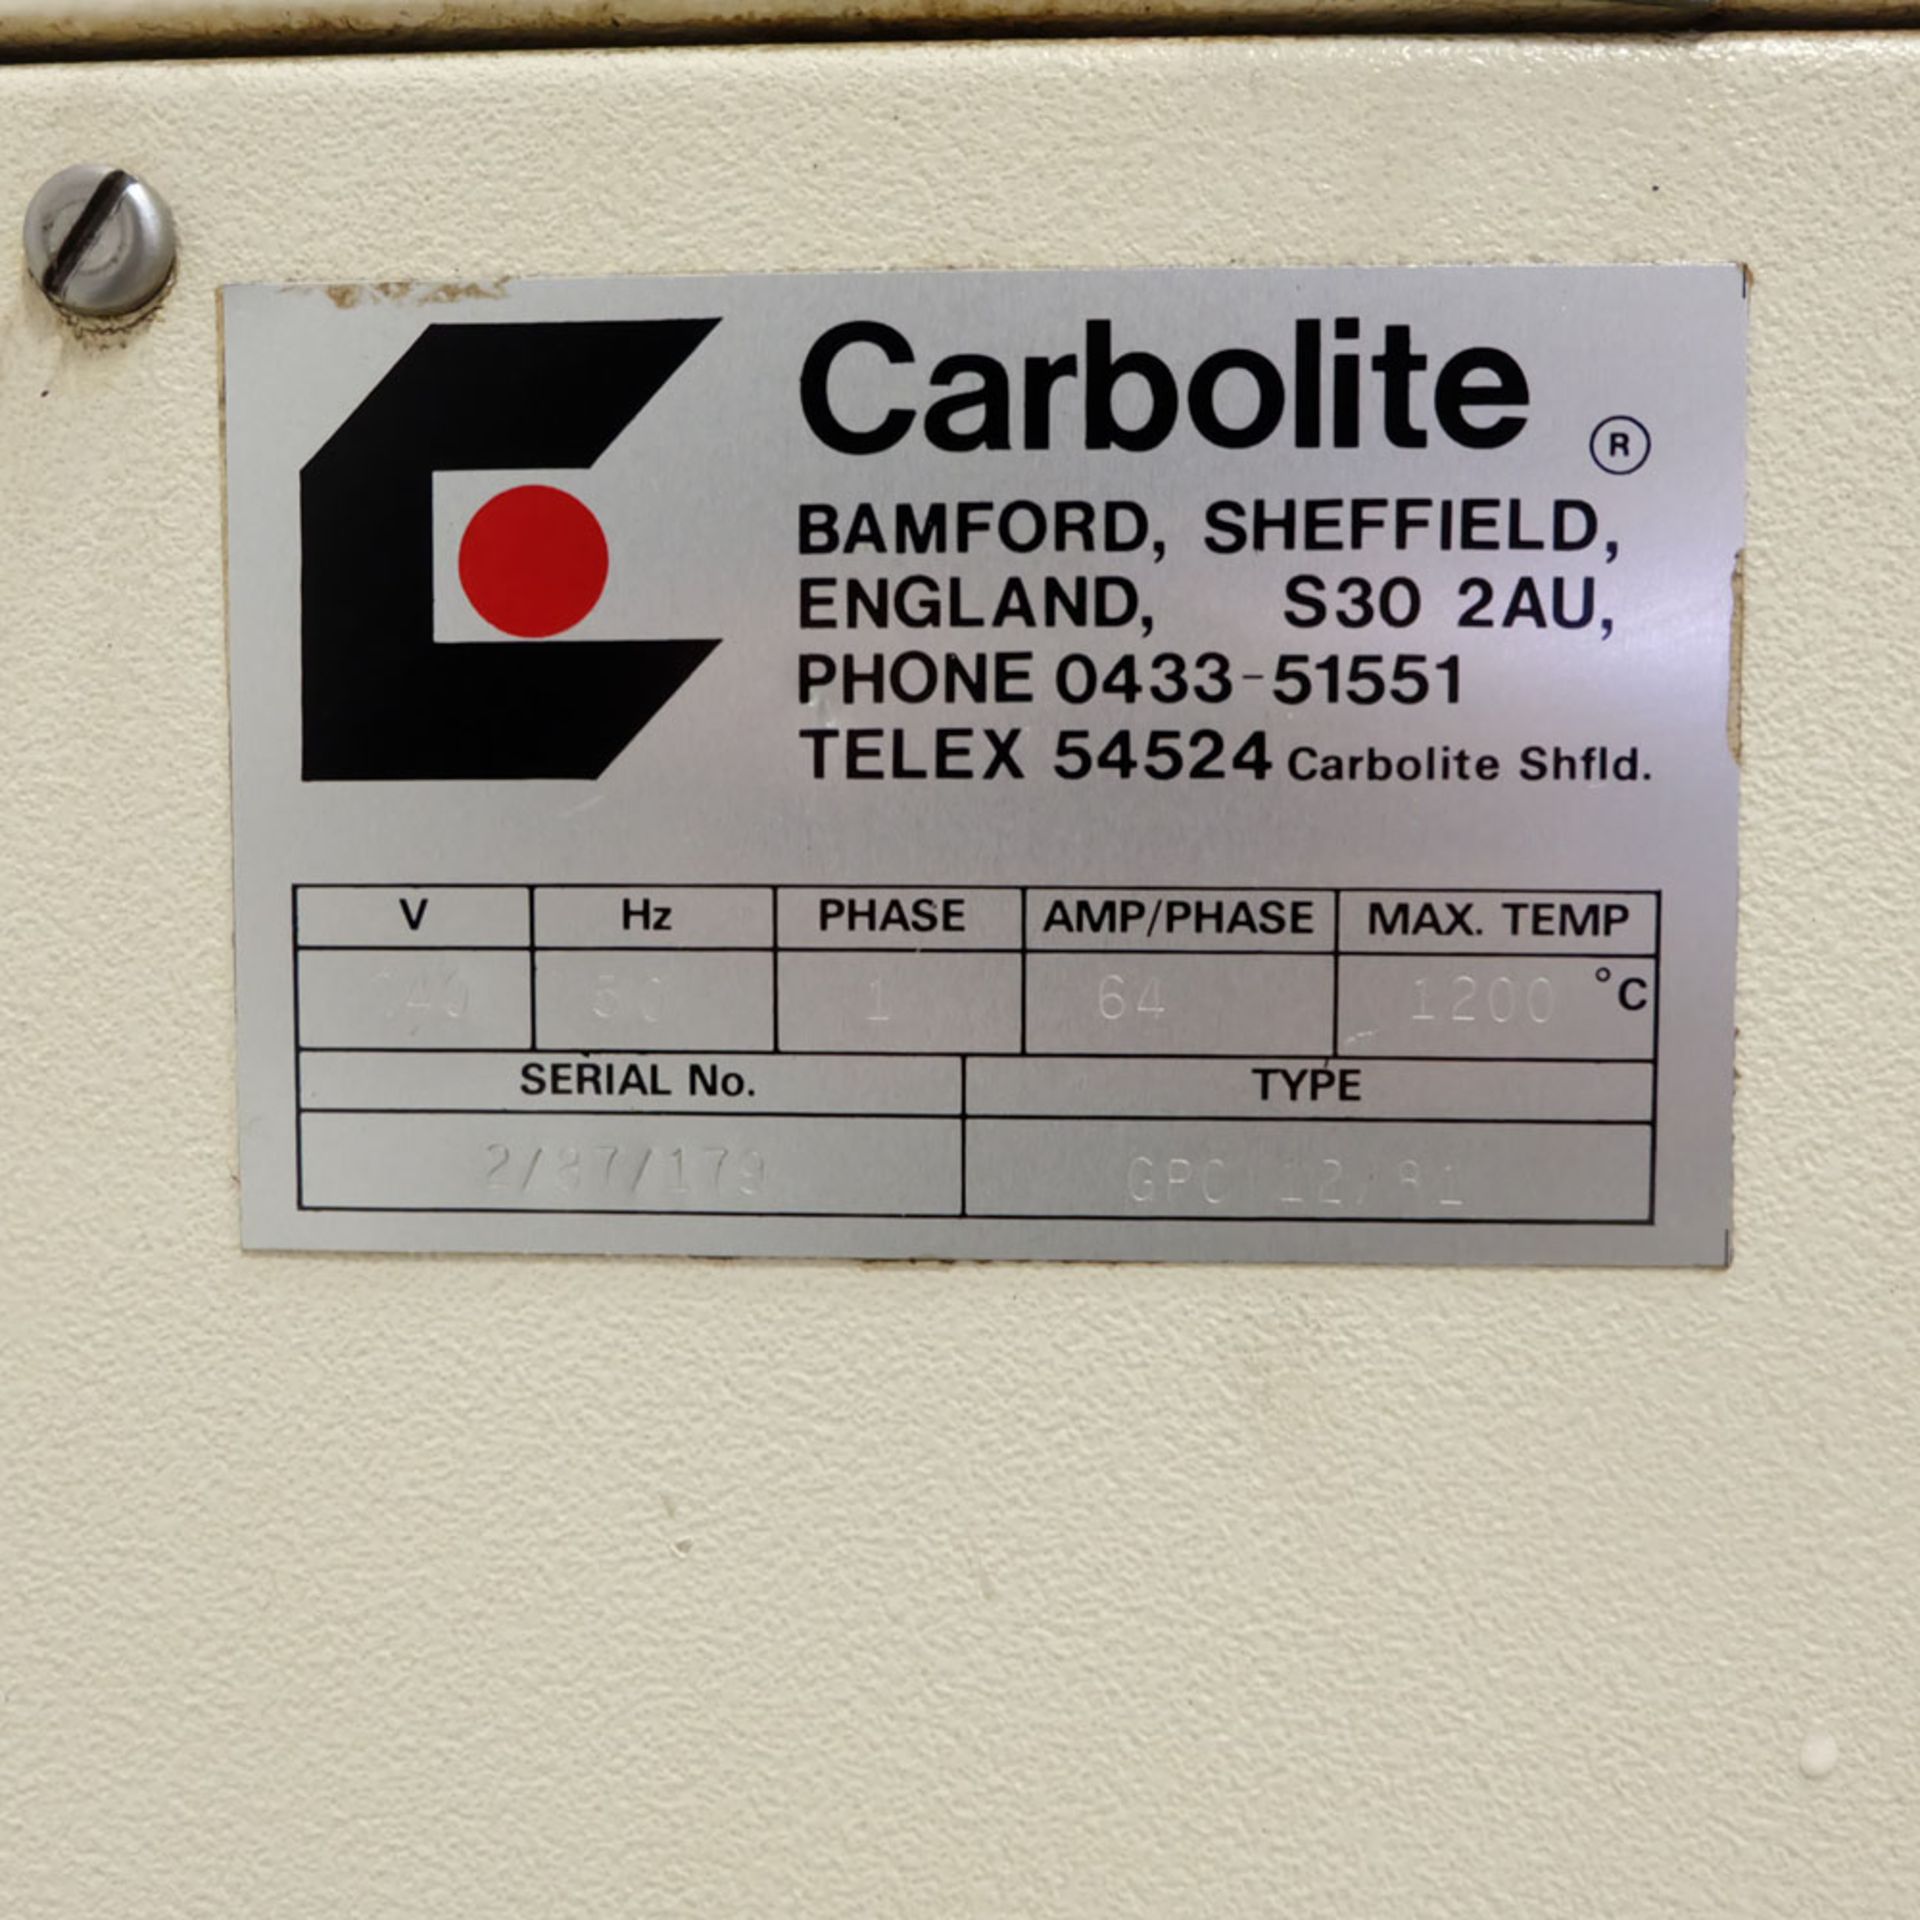 Carbolite Thermoserve Floor Standing Oven. Appature 400mm x 220mm. - Image 5 of 7